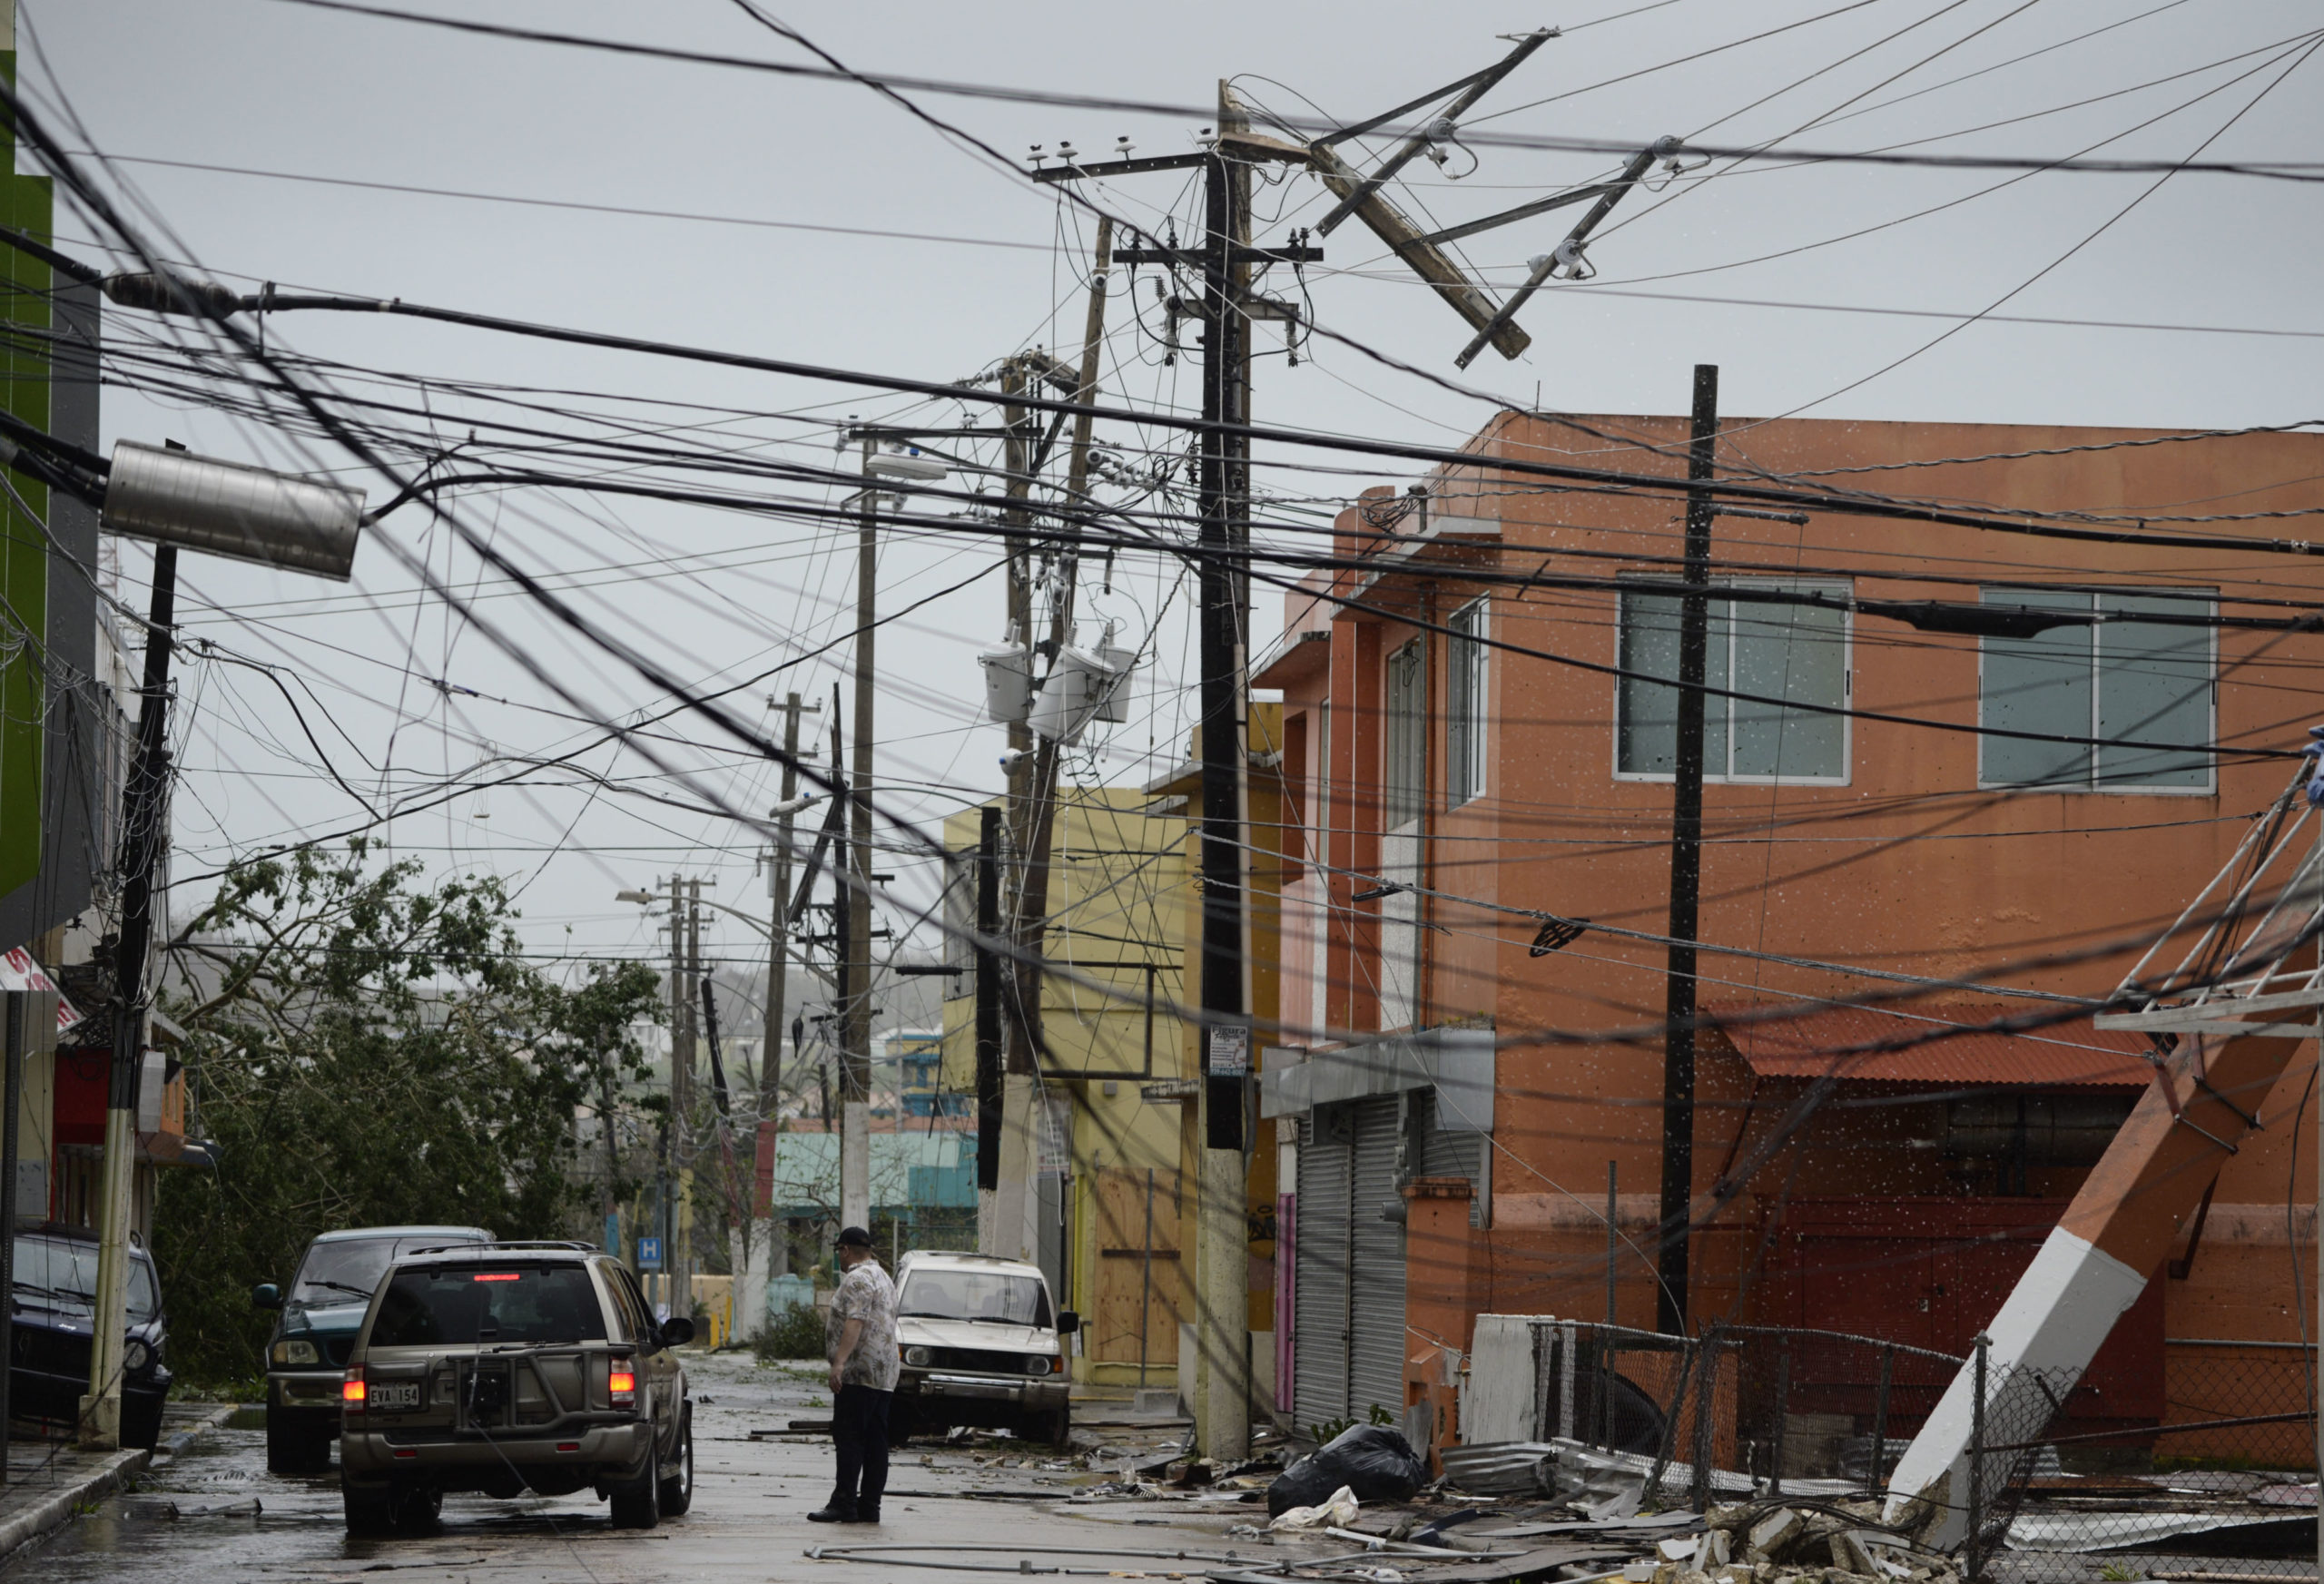 Maria’s Path Of Destruction Across Puerto Rico And The US Virgin Islands Is Heartbreaking